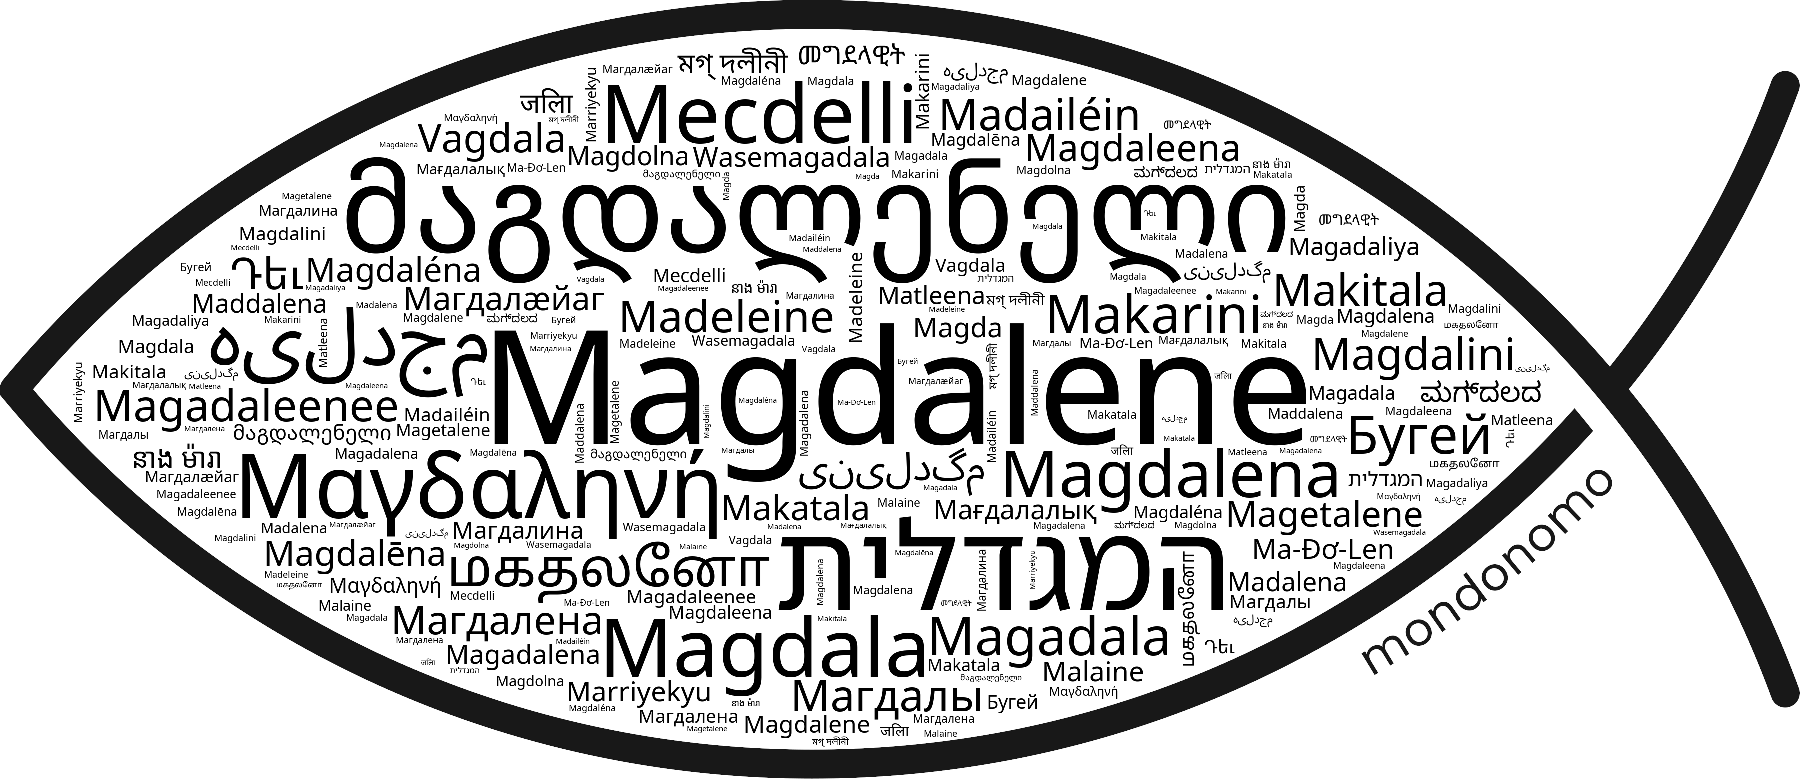 Name Magdalene in the world's Bibles